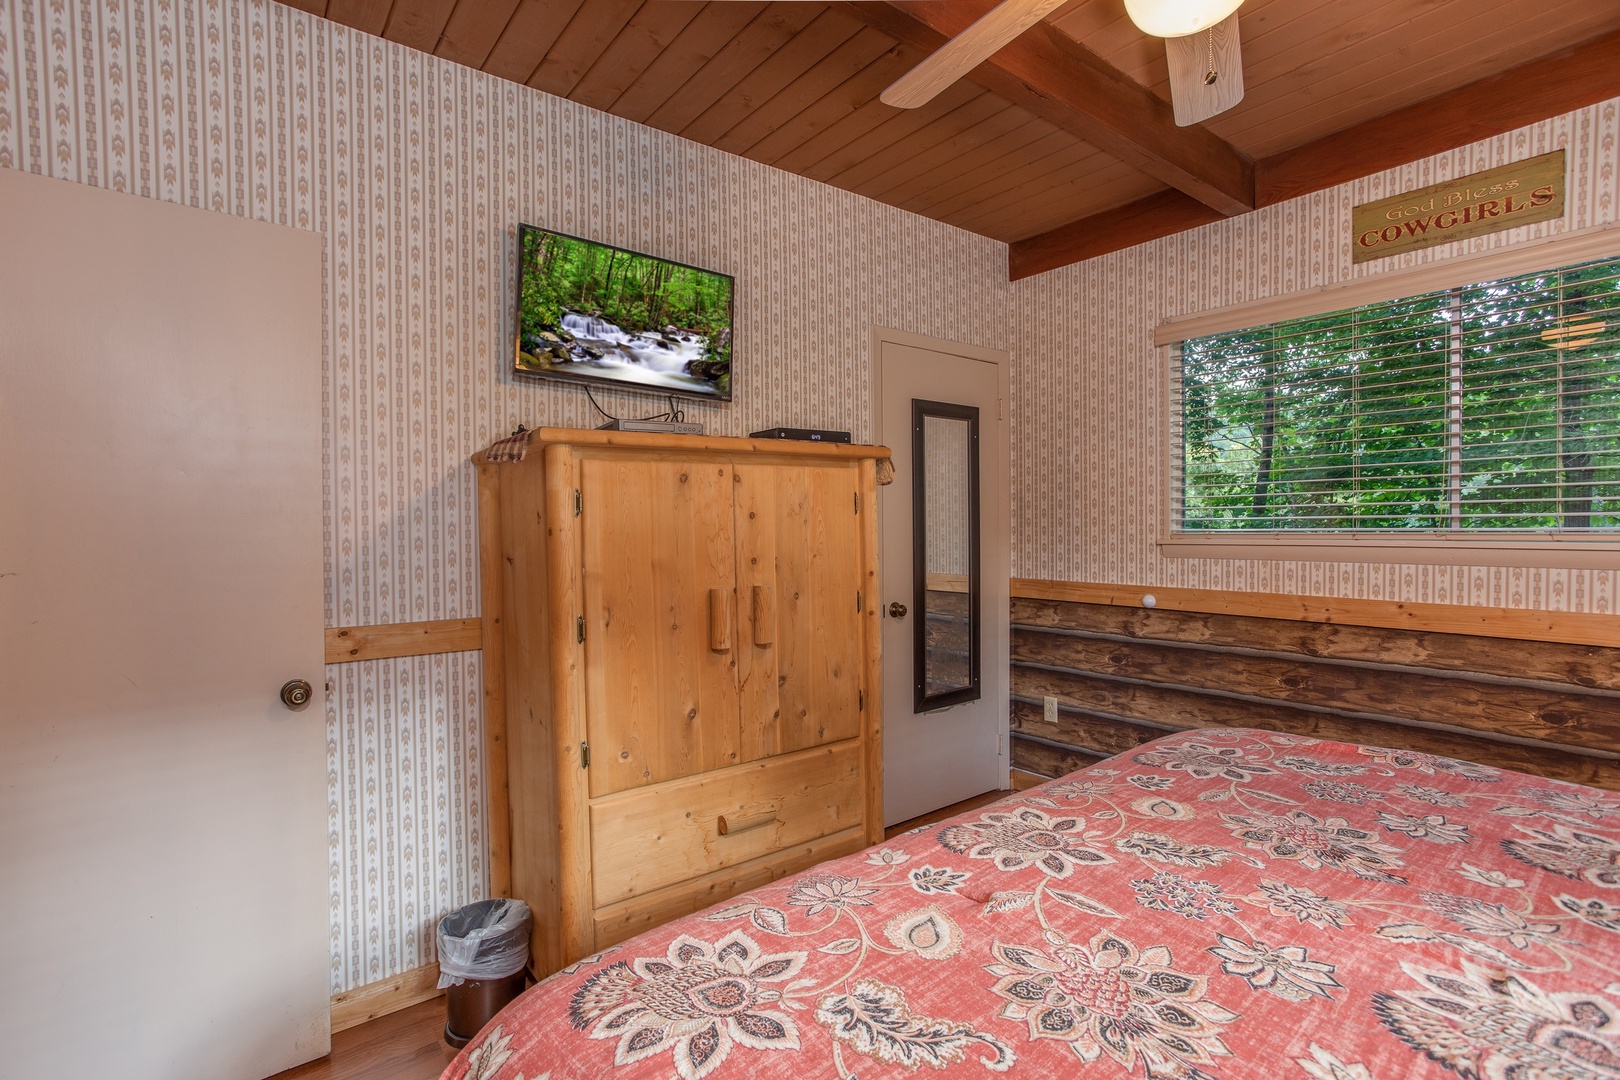 Second bedroom with a television and armoire at Bushwood Lodge, a 3-bedroom cabin rental located in Gatlinburg